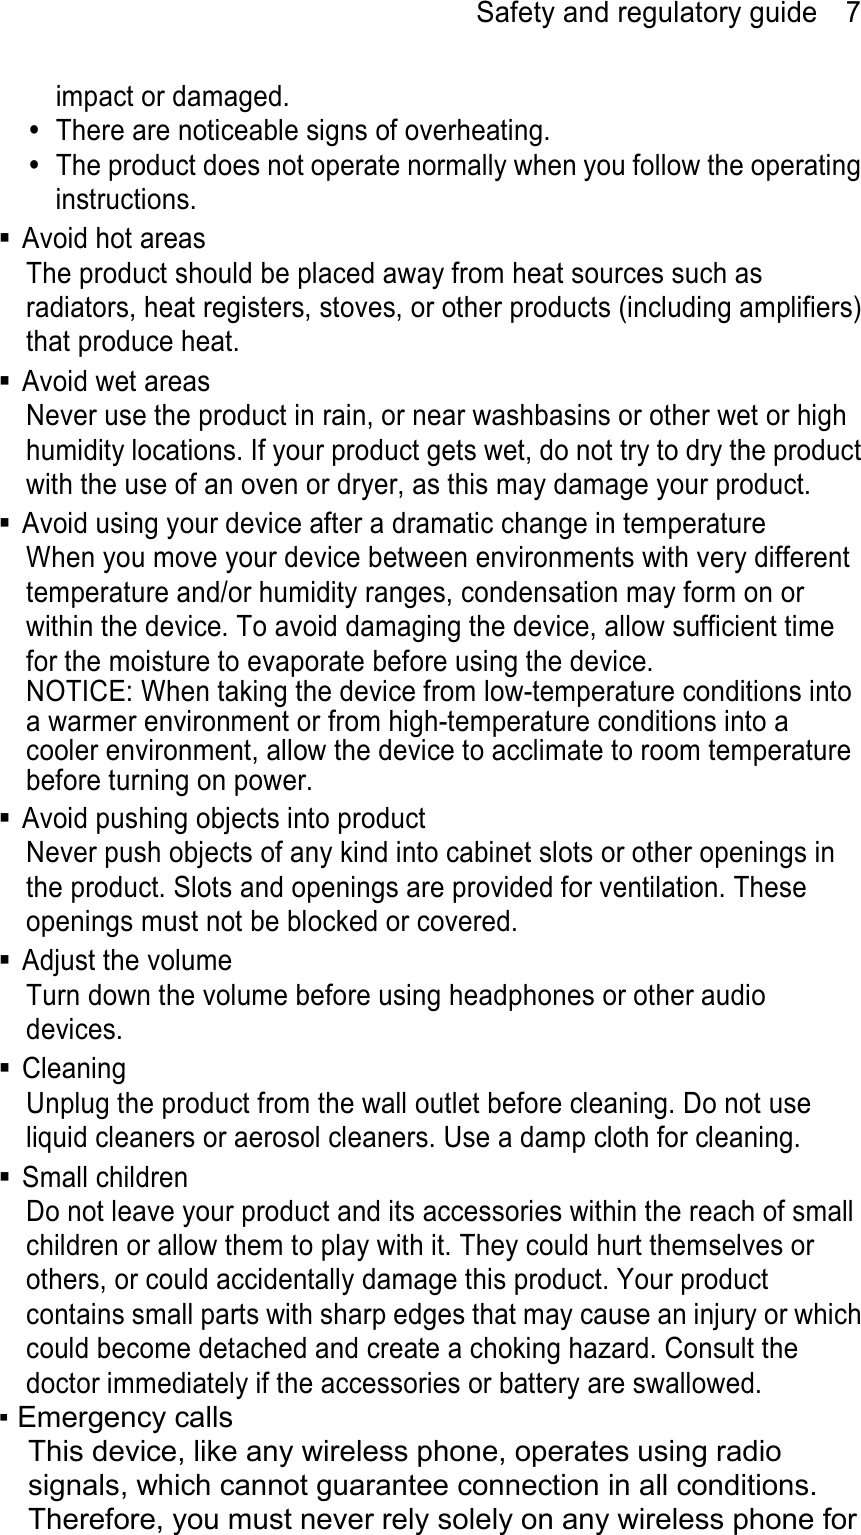 Safety and regulatory guide    7 impact or damaged.   There are noticeable signs of overheating.   The product does not operate normally when you follow the operating instructions.   Avoid hot areas The product should be placed away from heat sources such as radiators, heat registers, stoves, or other products (including amplifiers) that produce heat.   Avoid wet areas Never use the product in rain, or near washbasins or other wet or high humidity locations. If your product gets wet, do not try to dry the product with the use of an oven or dryer, as this may damage your product.   Avoid using your device after a dramatic change in temperature When you move your device between environments with very different temperature and/or humidity ranges, condensation may form on or within the device. To avoid damaging the device, allow sufficient time for the moisture to evaporate before using the device. NOTICE: When taking the device from low-temperature conditions into a warmer environment or from high-temperature conditions into a cooler environment, allow the device to acclimate to room temperature before turning on power.   Avoid pushing objects into product Never push objects of any kind into cabinet slots or other openings in the product. Slots and openings are provided for ventilation. These openings must not be blocked or covered.  Adjust the volume Turn down the volume before using headphones or other audio devices.  Cleaning Unplug the product from the wall outlet before cleaning. Do not use liquid cleaners or aerosol cleaners. Use a damp cloth for cleaning.    Small children Do not leave your product and its accessories within the reach of small children or allow them to play with it. They could hurt themselves or others, or could accidentally damage this product. Your product contains small parts with sharp edges that may cause an injury or which could become detached and create a choking hazard. Consult the doctor immediately if the accessories or battery are swallowed. ▪ Emergency calls This device, like any wireless phone, operates using radio signals, which cannot guarantee connection in all conditions. Therefore, you must never rely solely on any wireless phone for 